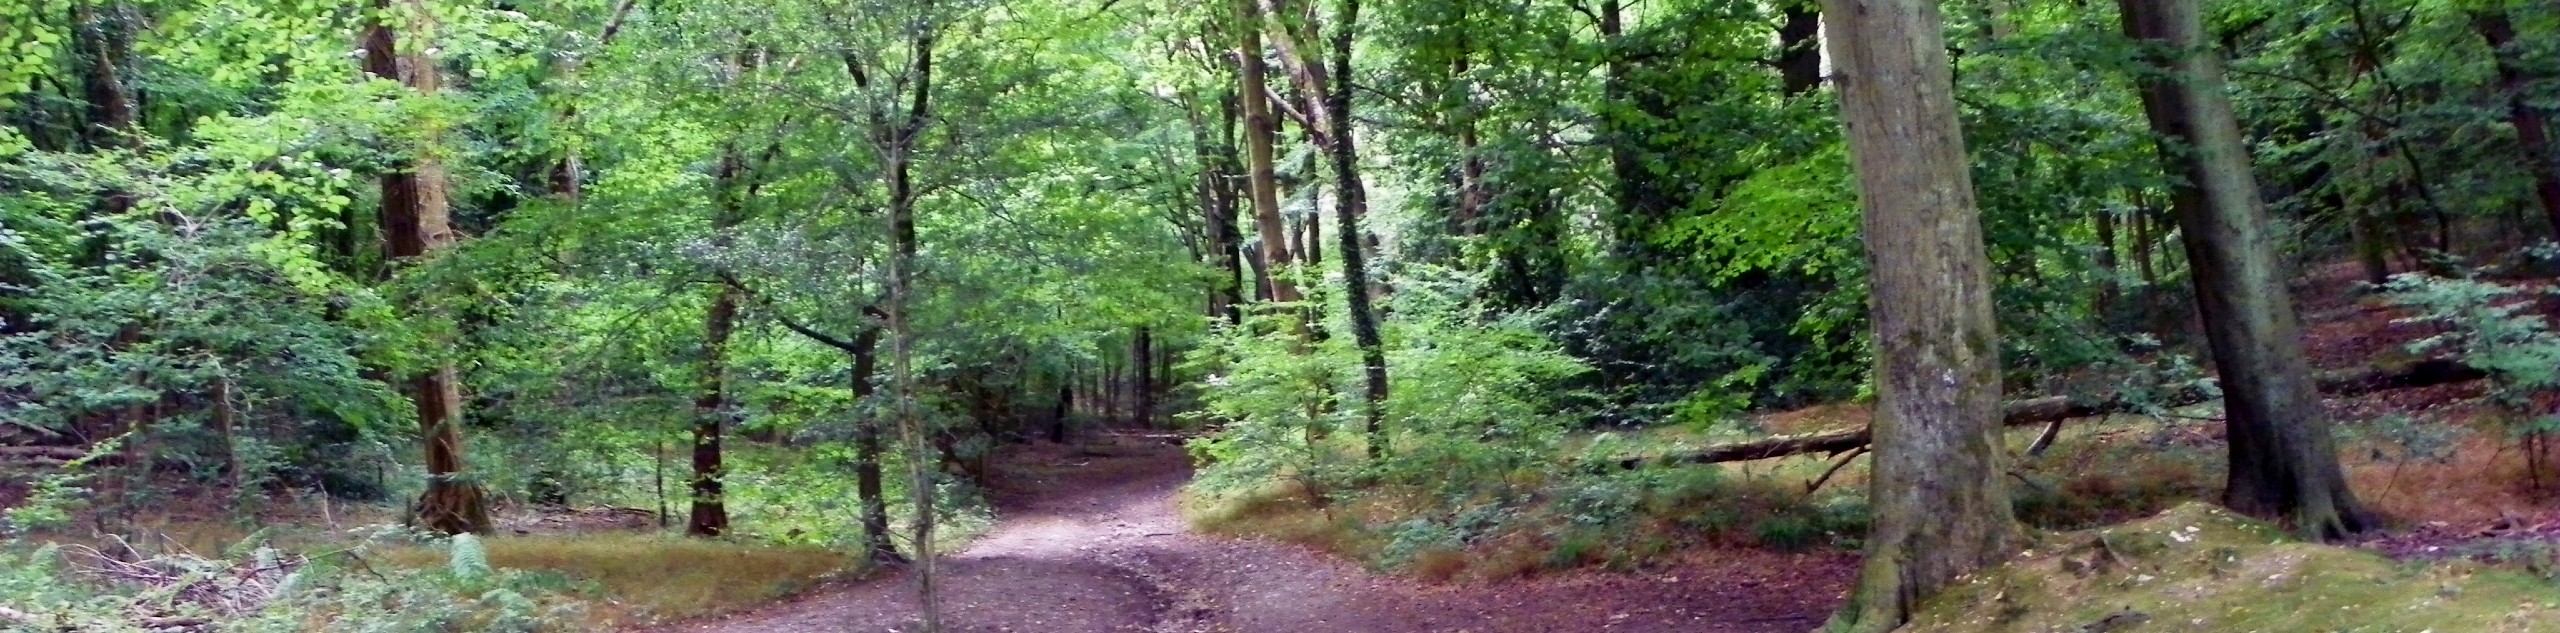 West Wycombe Woods Circular